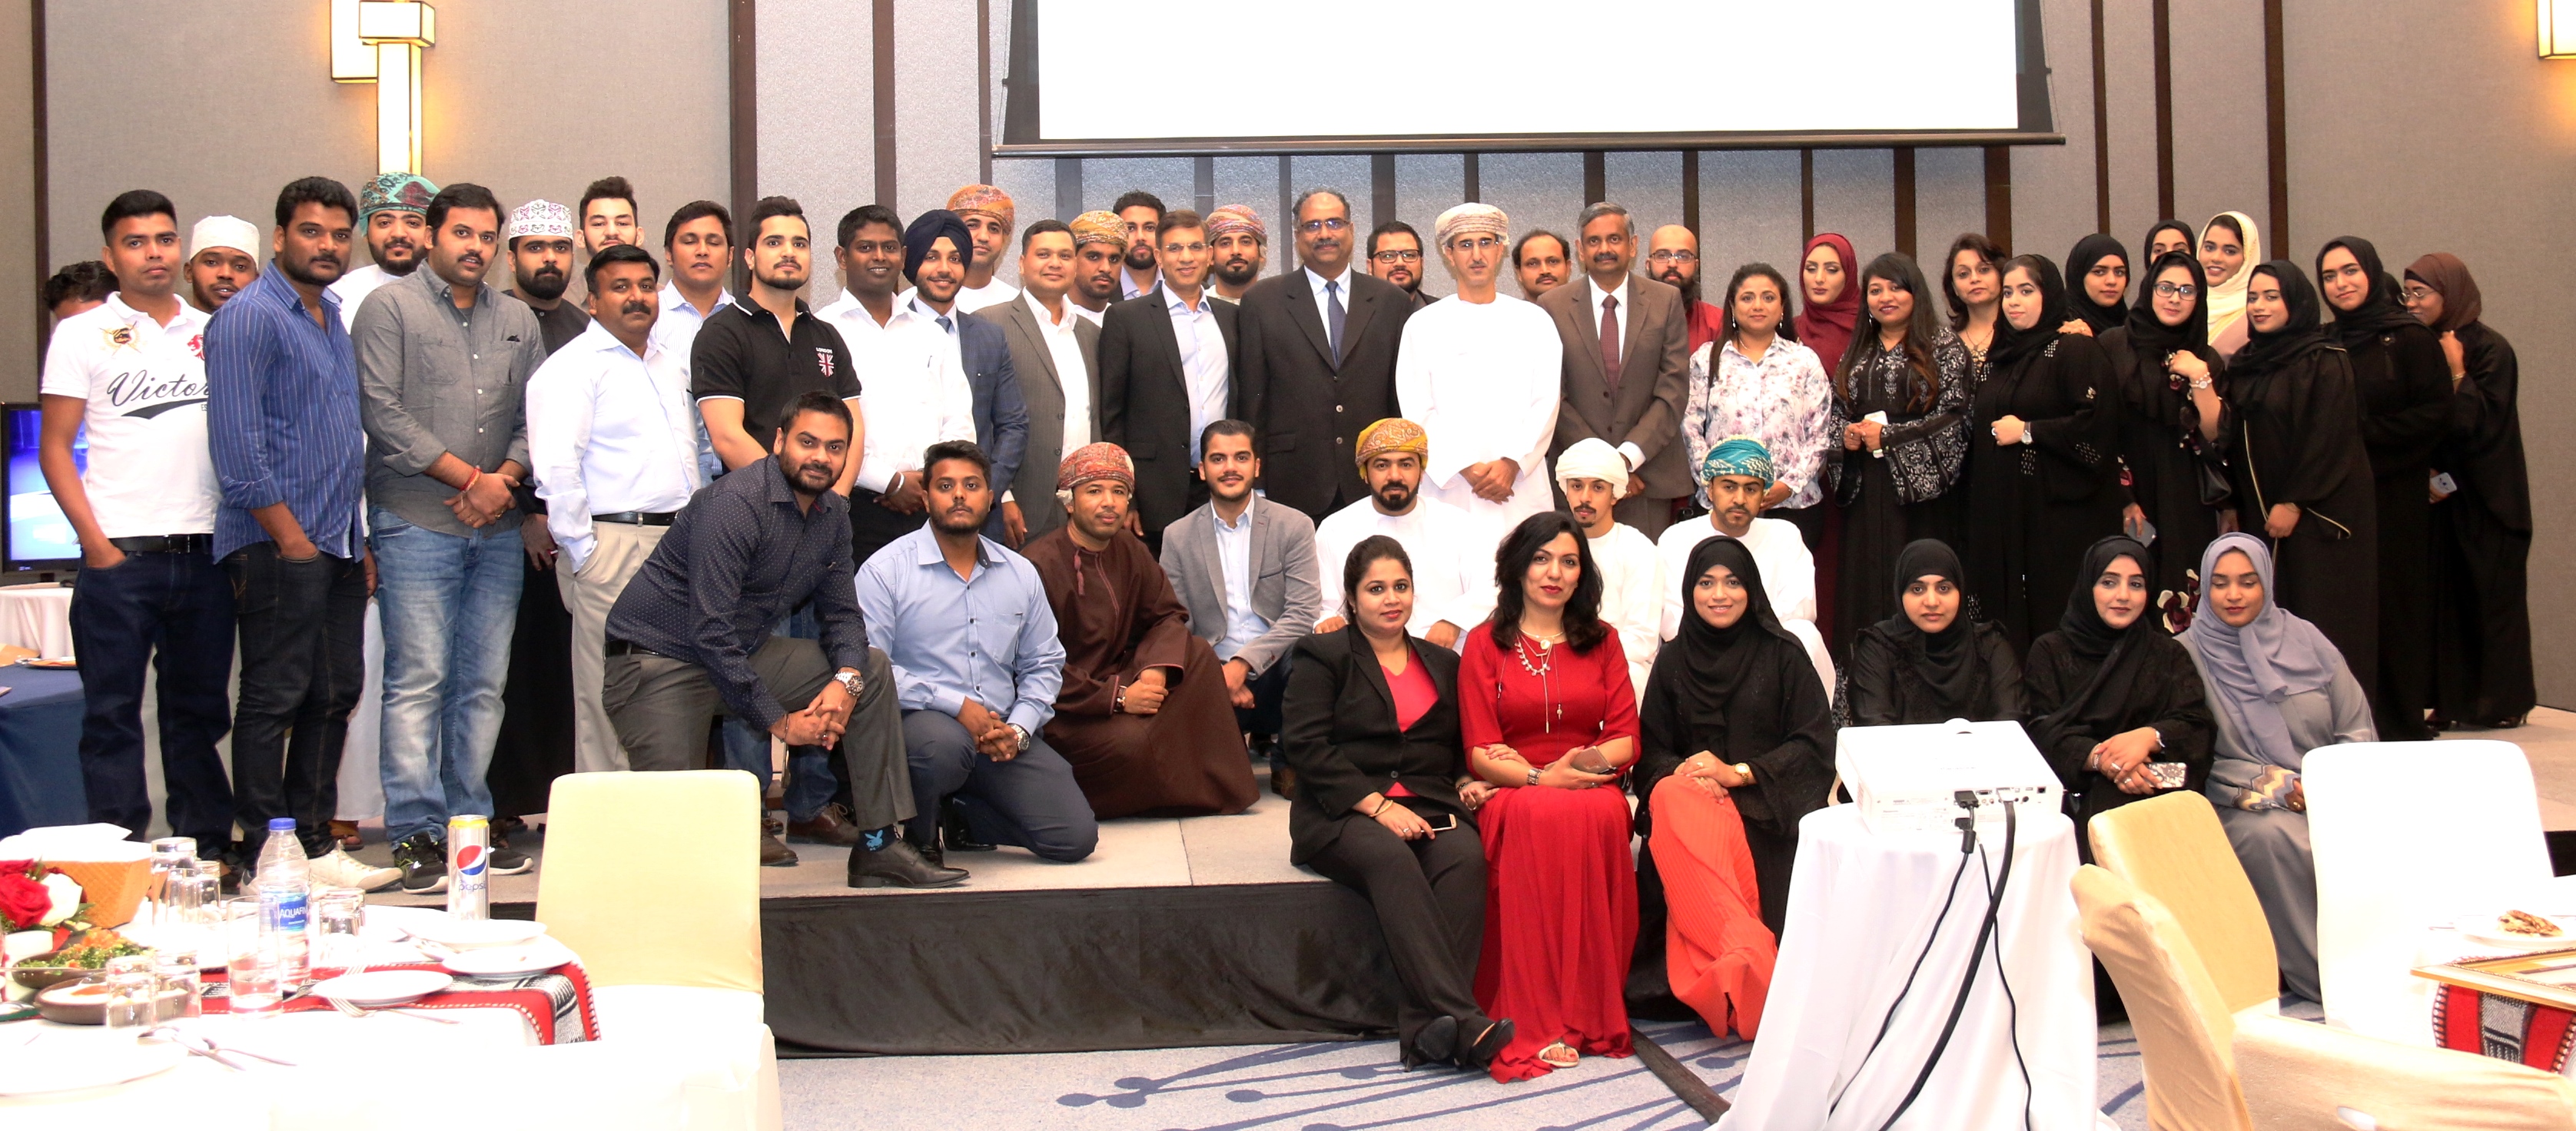 Infoline hosts annual iftar for its employees and customers